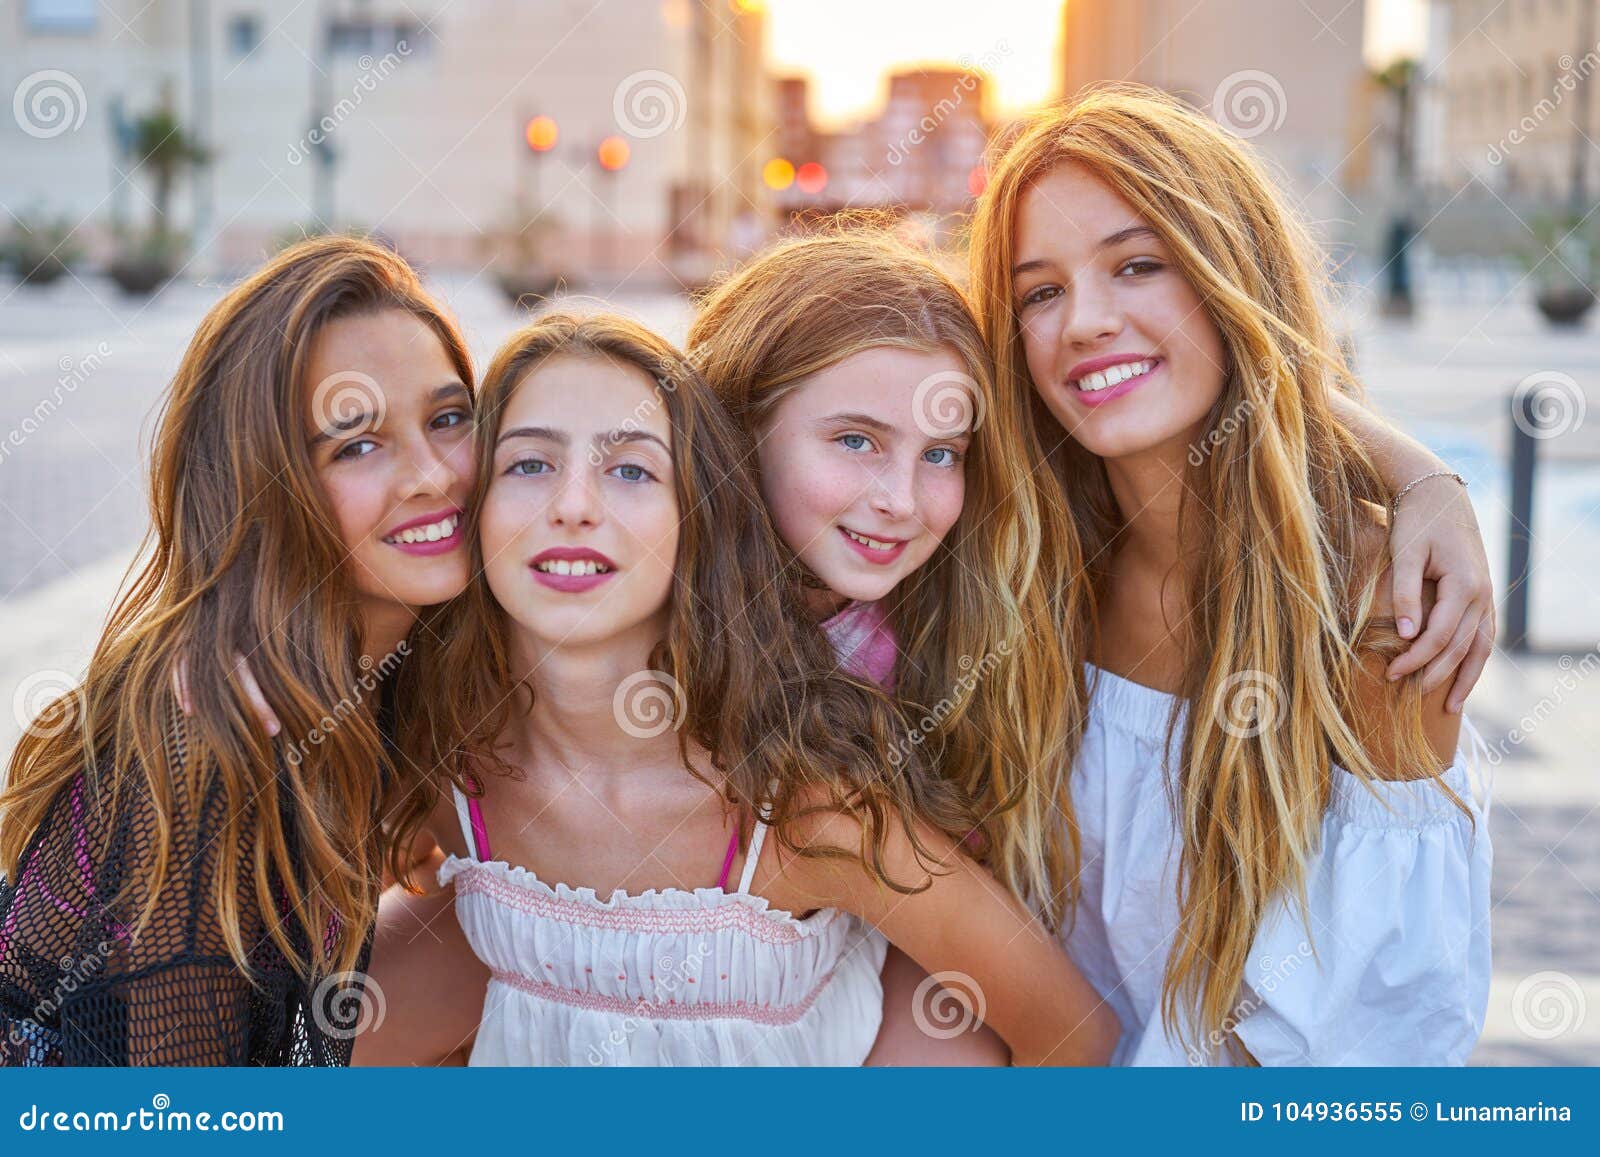 Best Friends Teen Girls at Sunset in the City Stock Image - Image ...